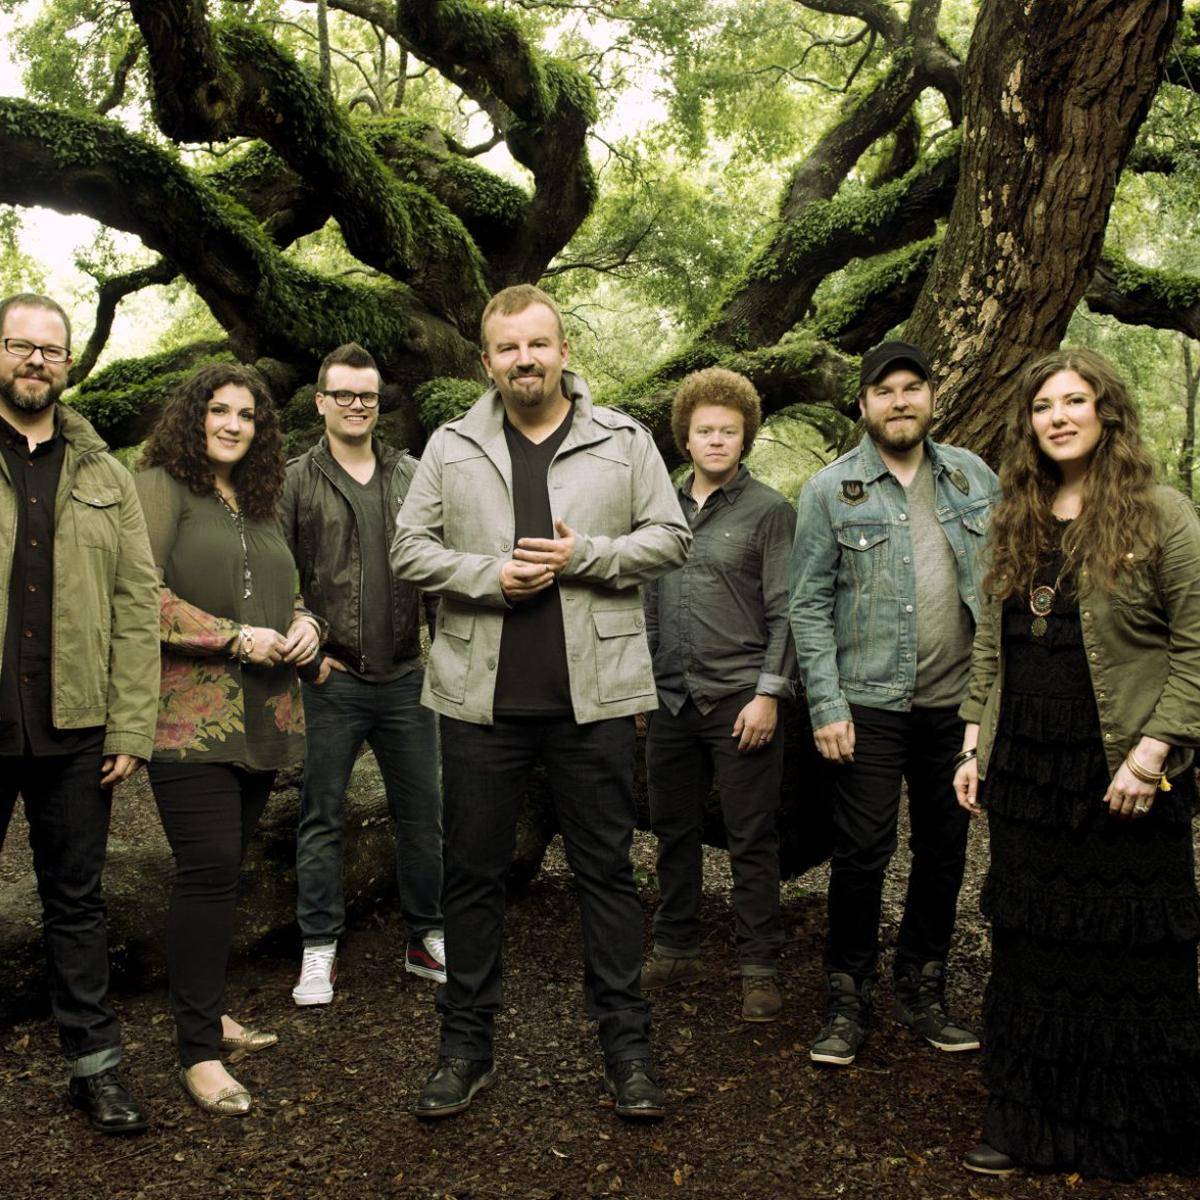 Casting Crowns - Thrive